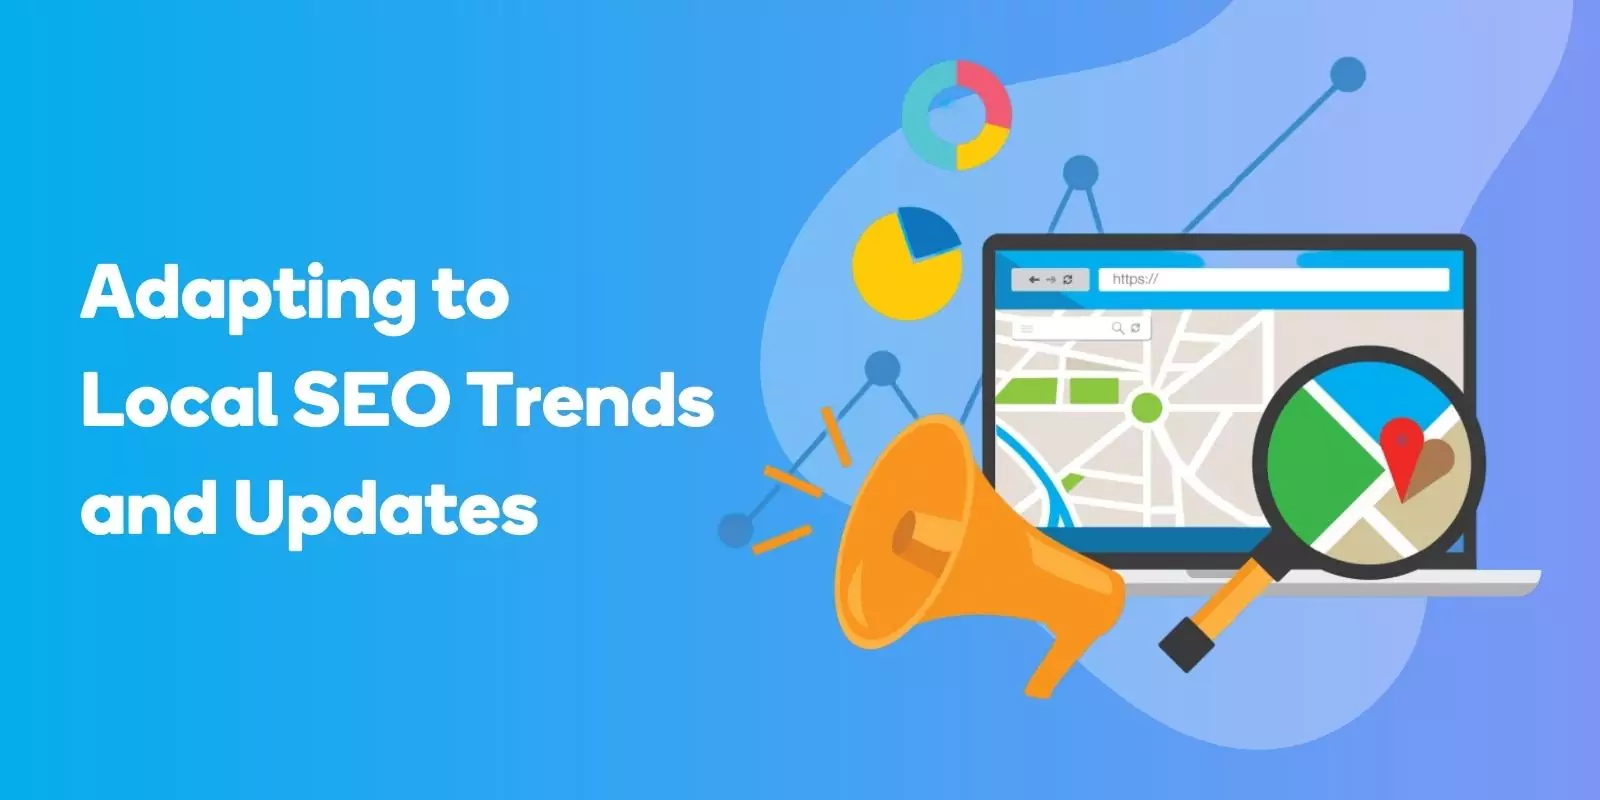 Adapting to Local SEO Trends and Updates